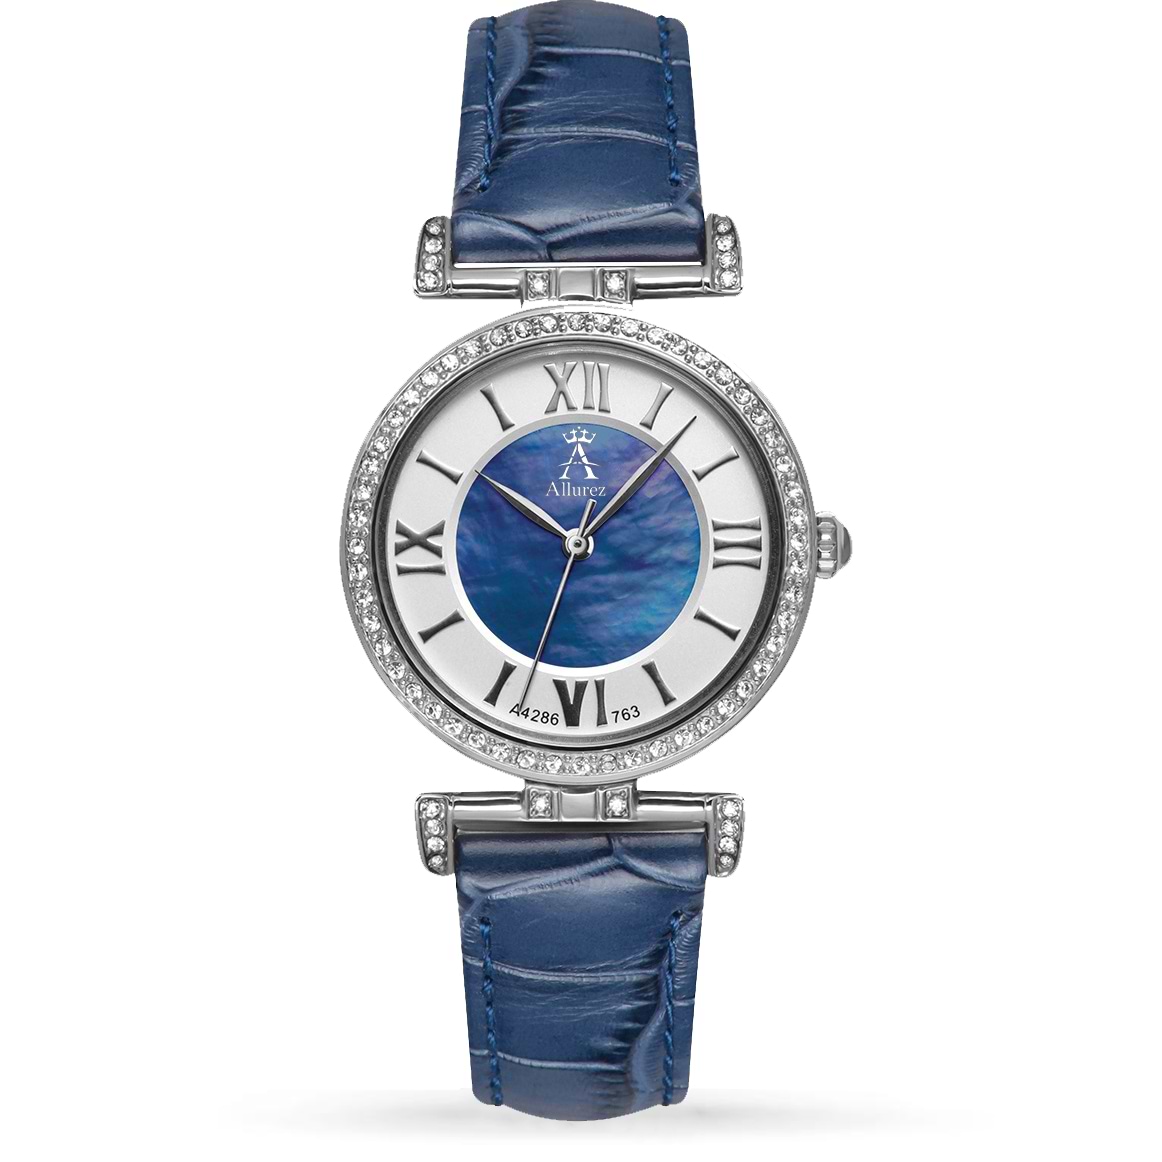 Allurez Women's Blue Mother of Pearl Dial Genuine Leather Strap Watch